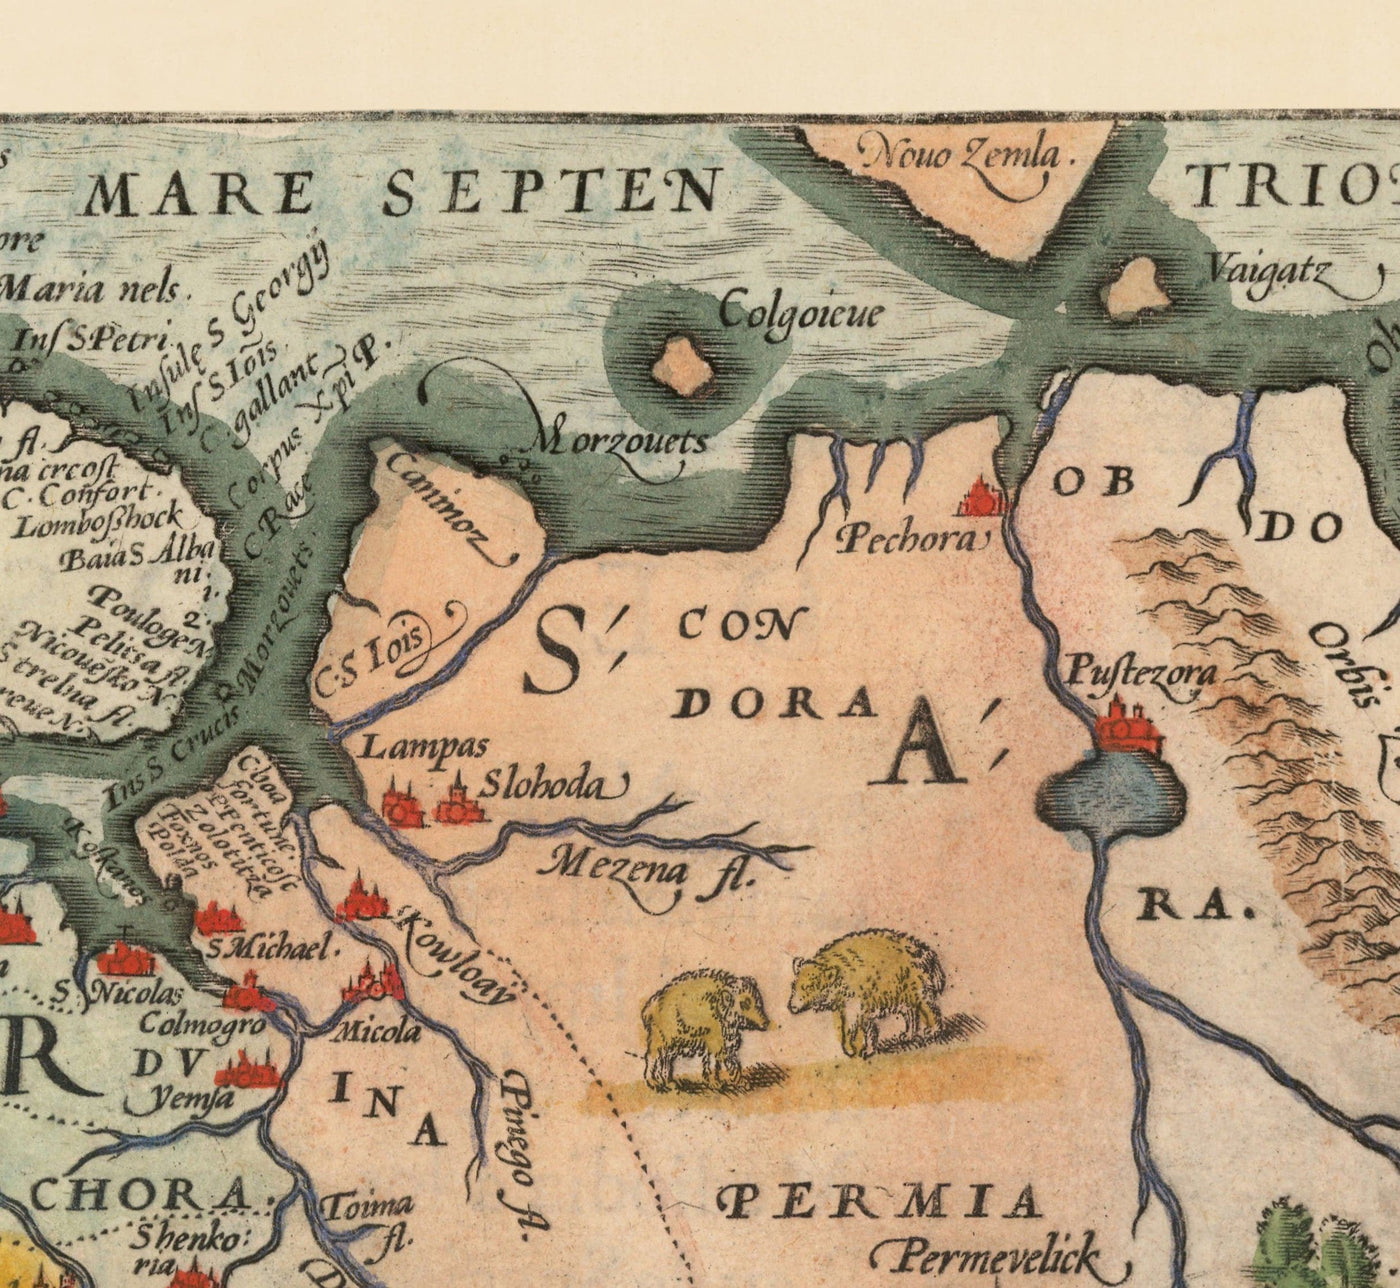 Old Map of Russia and Tartary, 1584 by Ortelius - Rare Chart of Moscow, Siberia, Kazakhstan, Turkmenistan, Uzbekistan